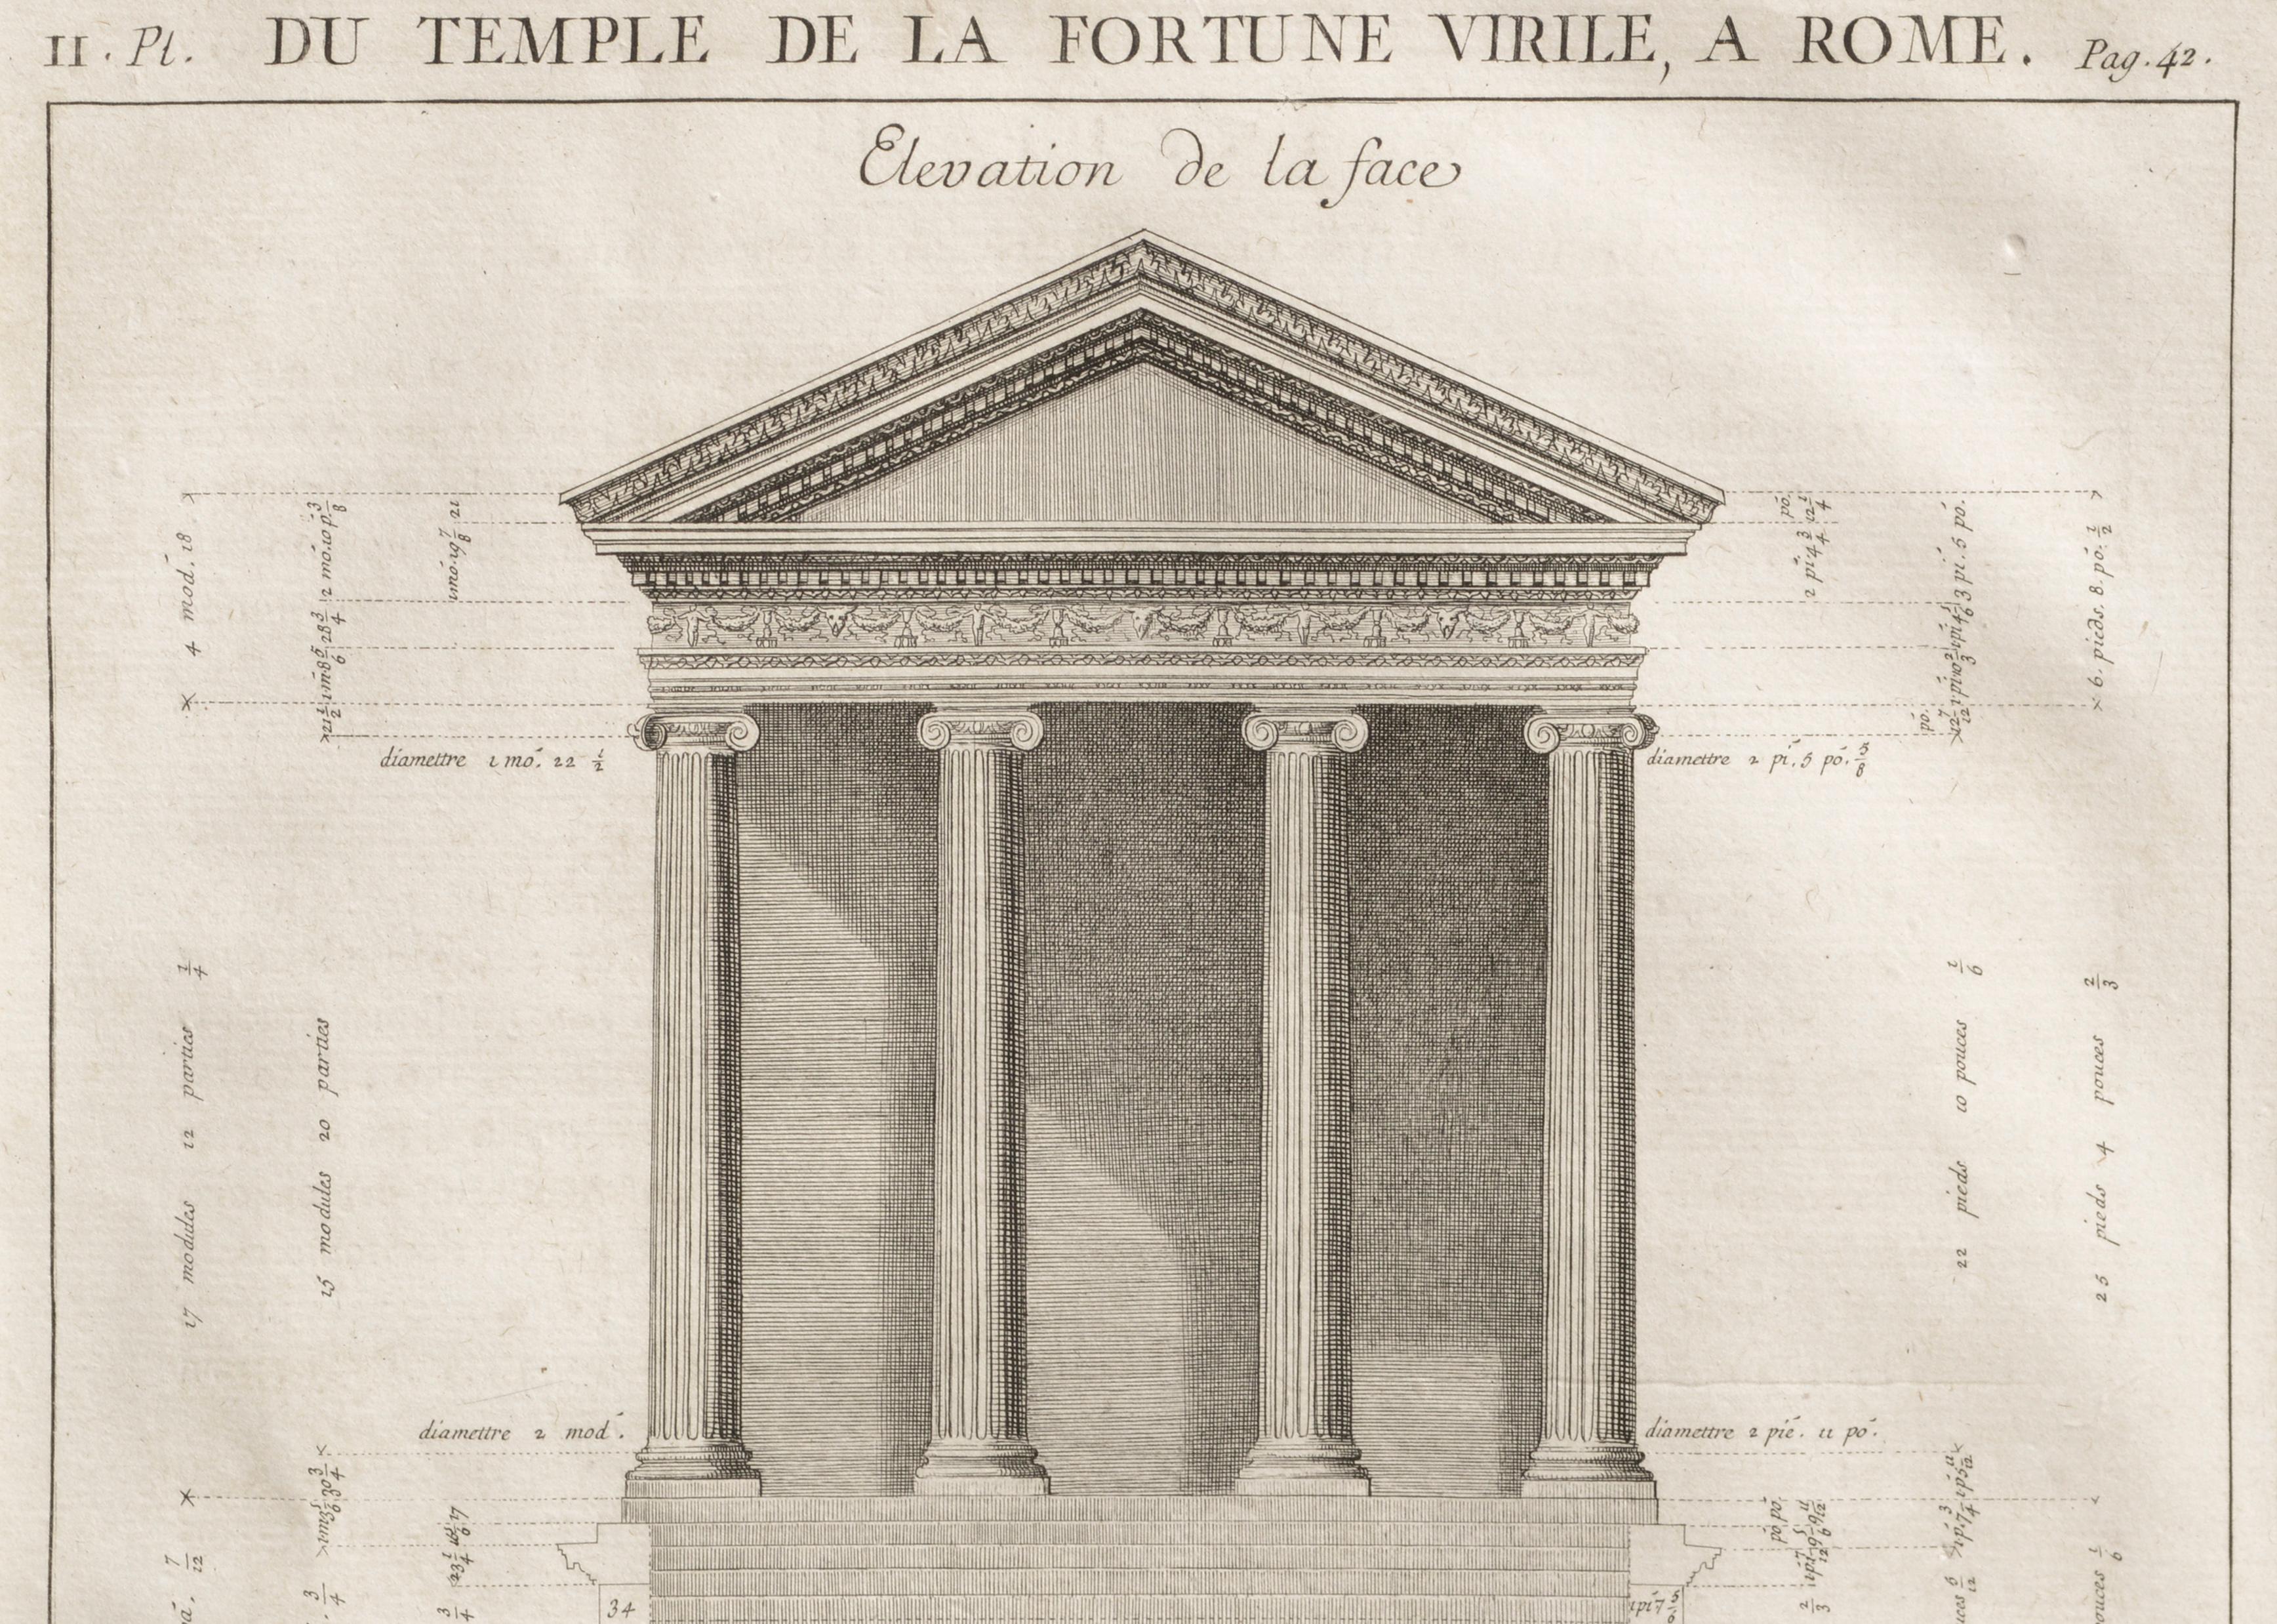 Pair of lithographs of The Temple of Portunus in Rome (Italian: Tempio di Portuno) facade and floor plan by Antoine Desgodetz (French, 1653-1728). These pages are from the 1779 reissue of 